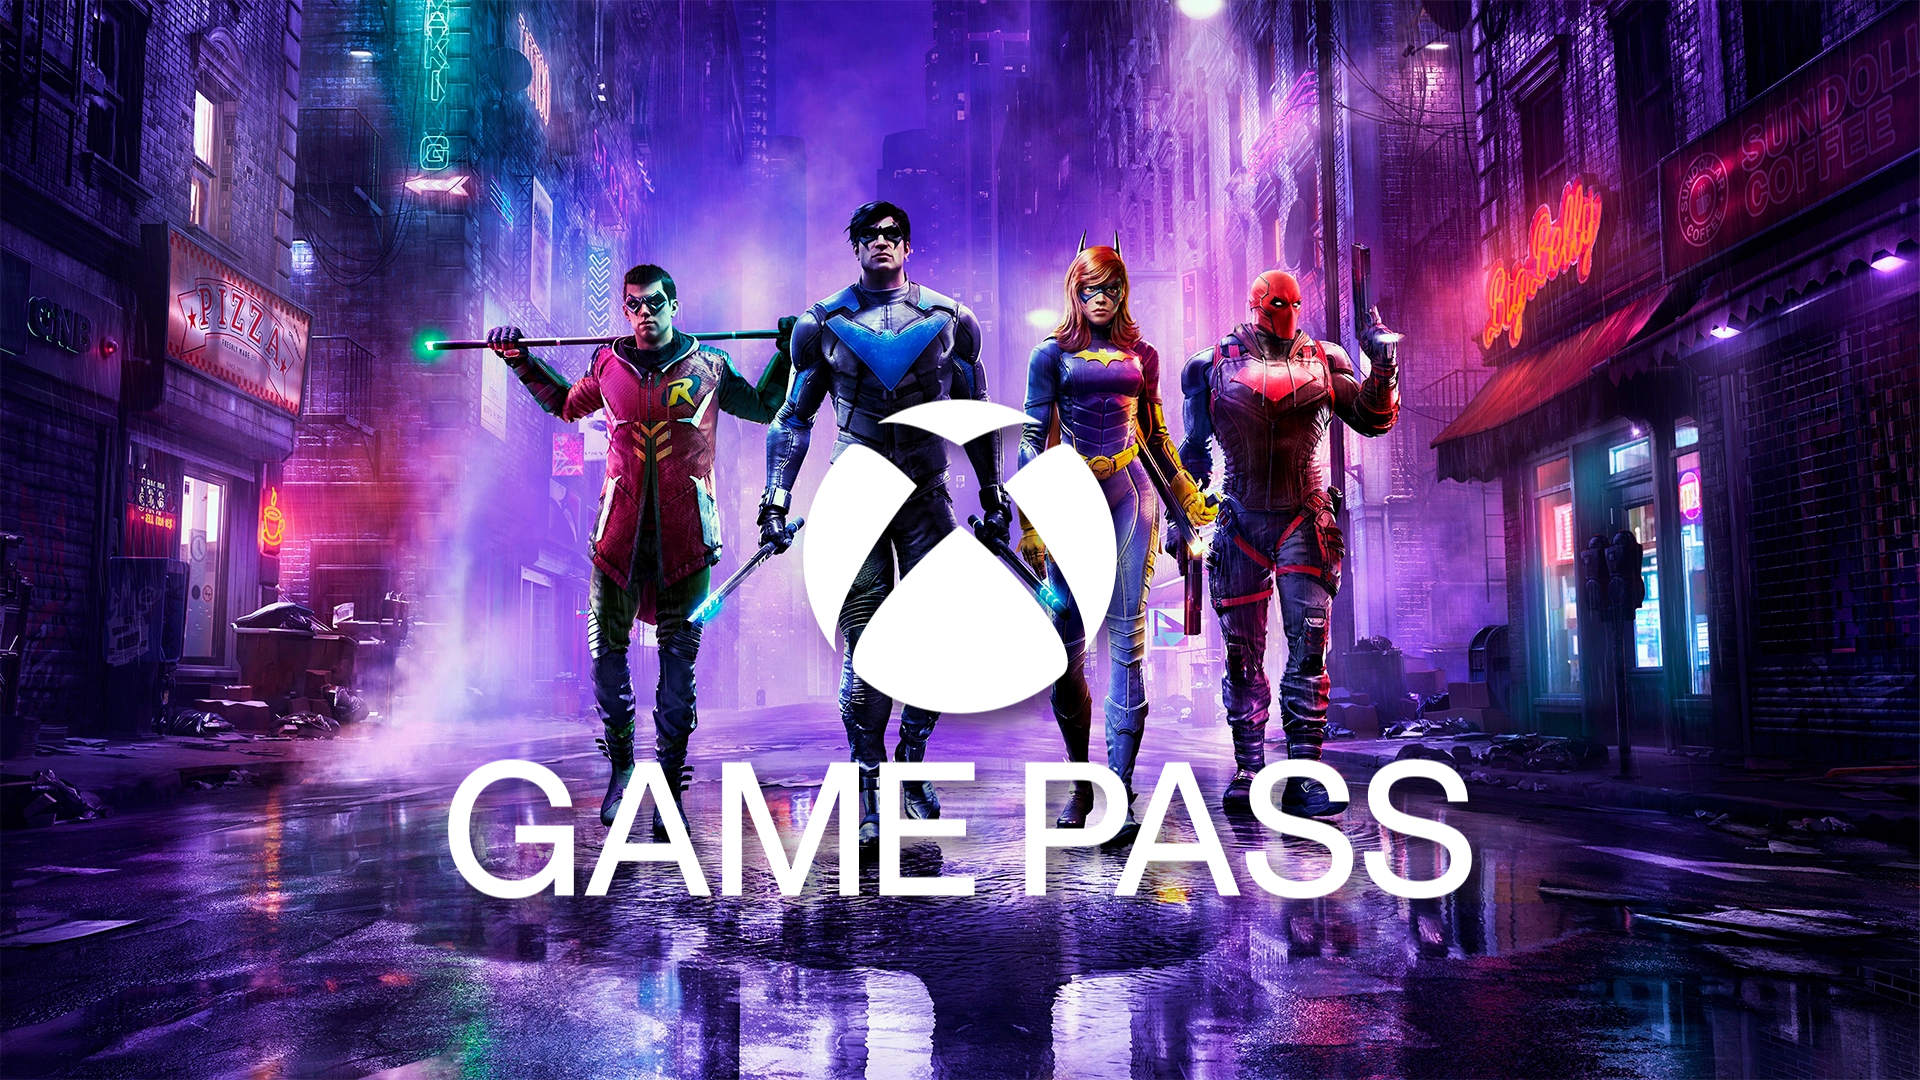 Xbox Game Pass: Gotham Knights and more great games will join the service  very soon